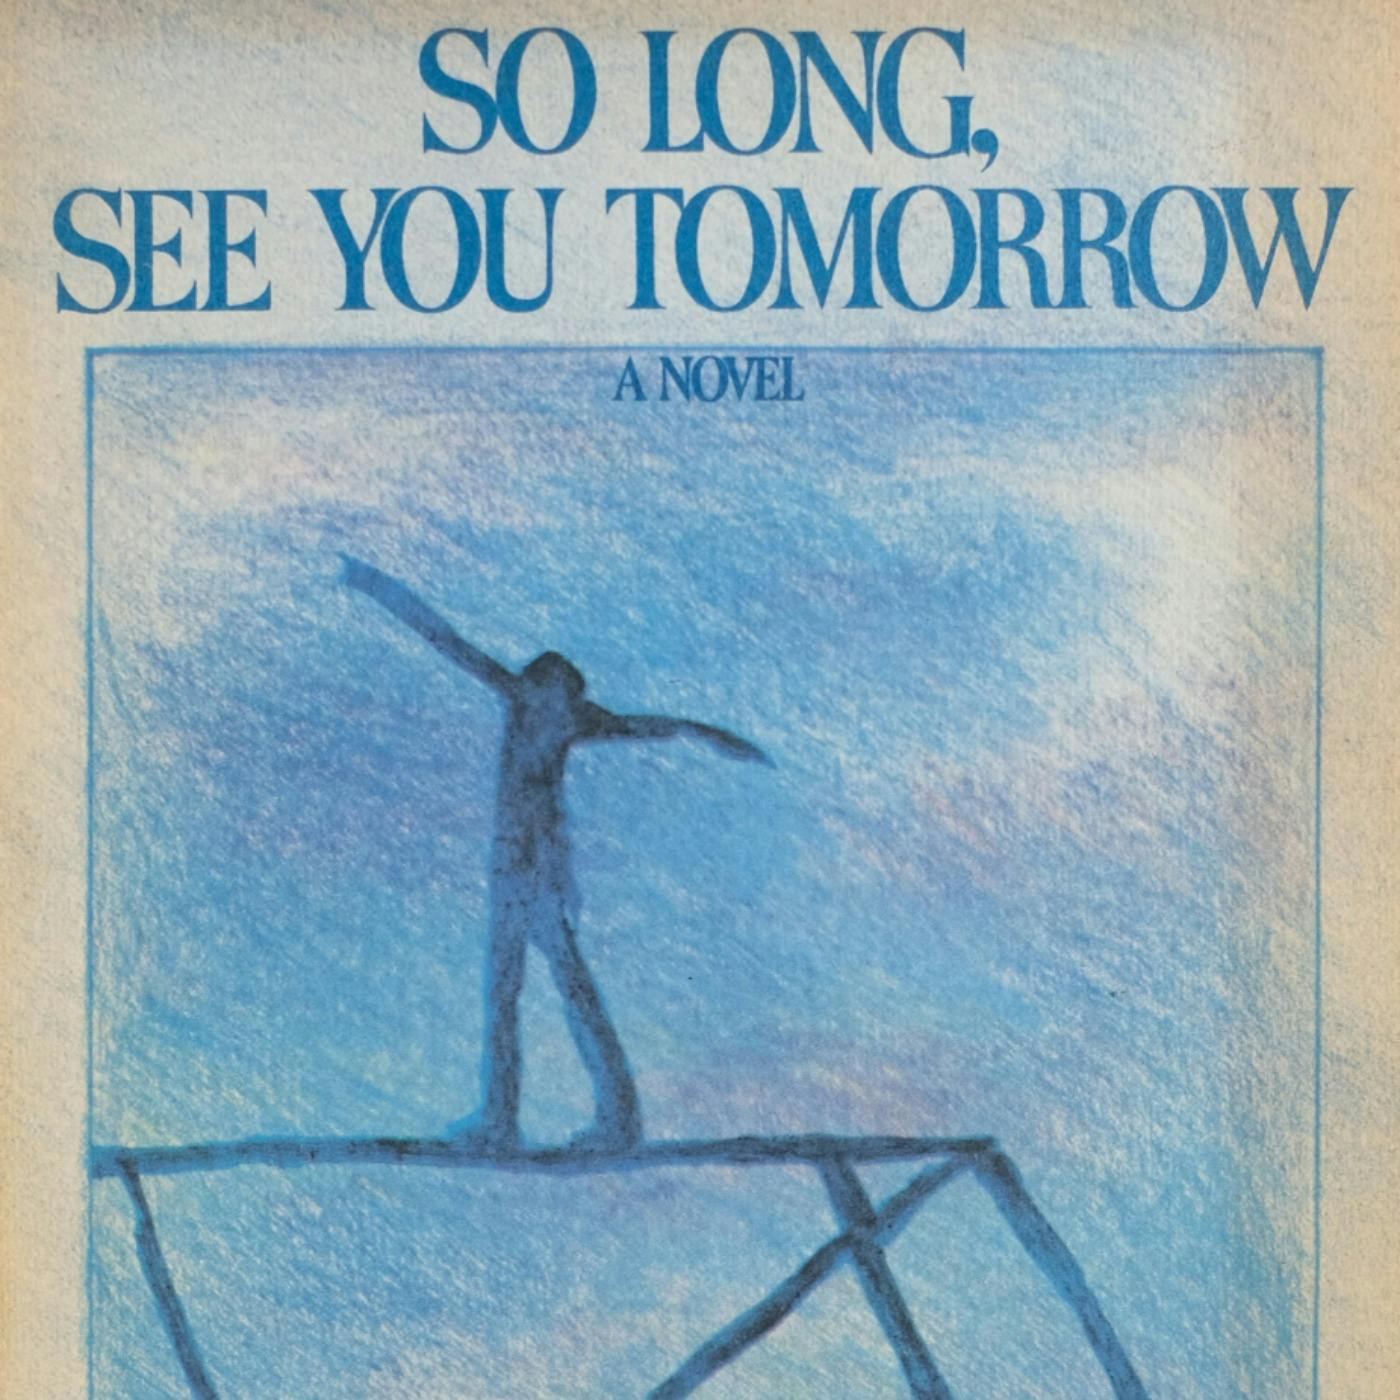 So Long, See You Tomorrow by William Maxwell - rerun